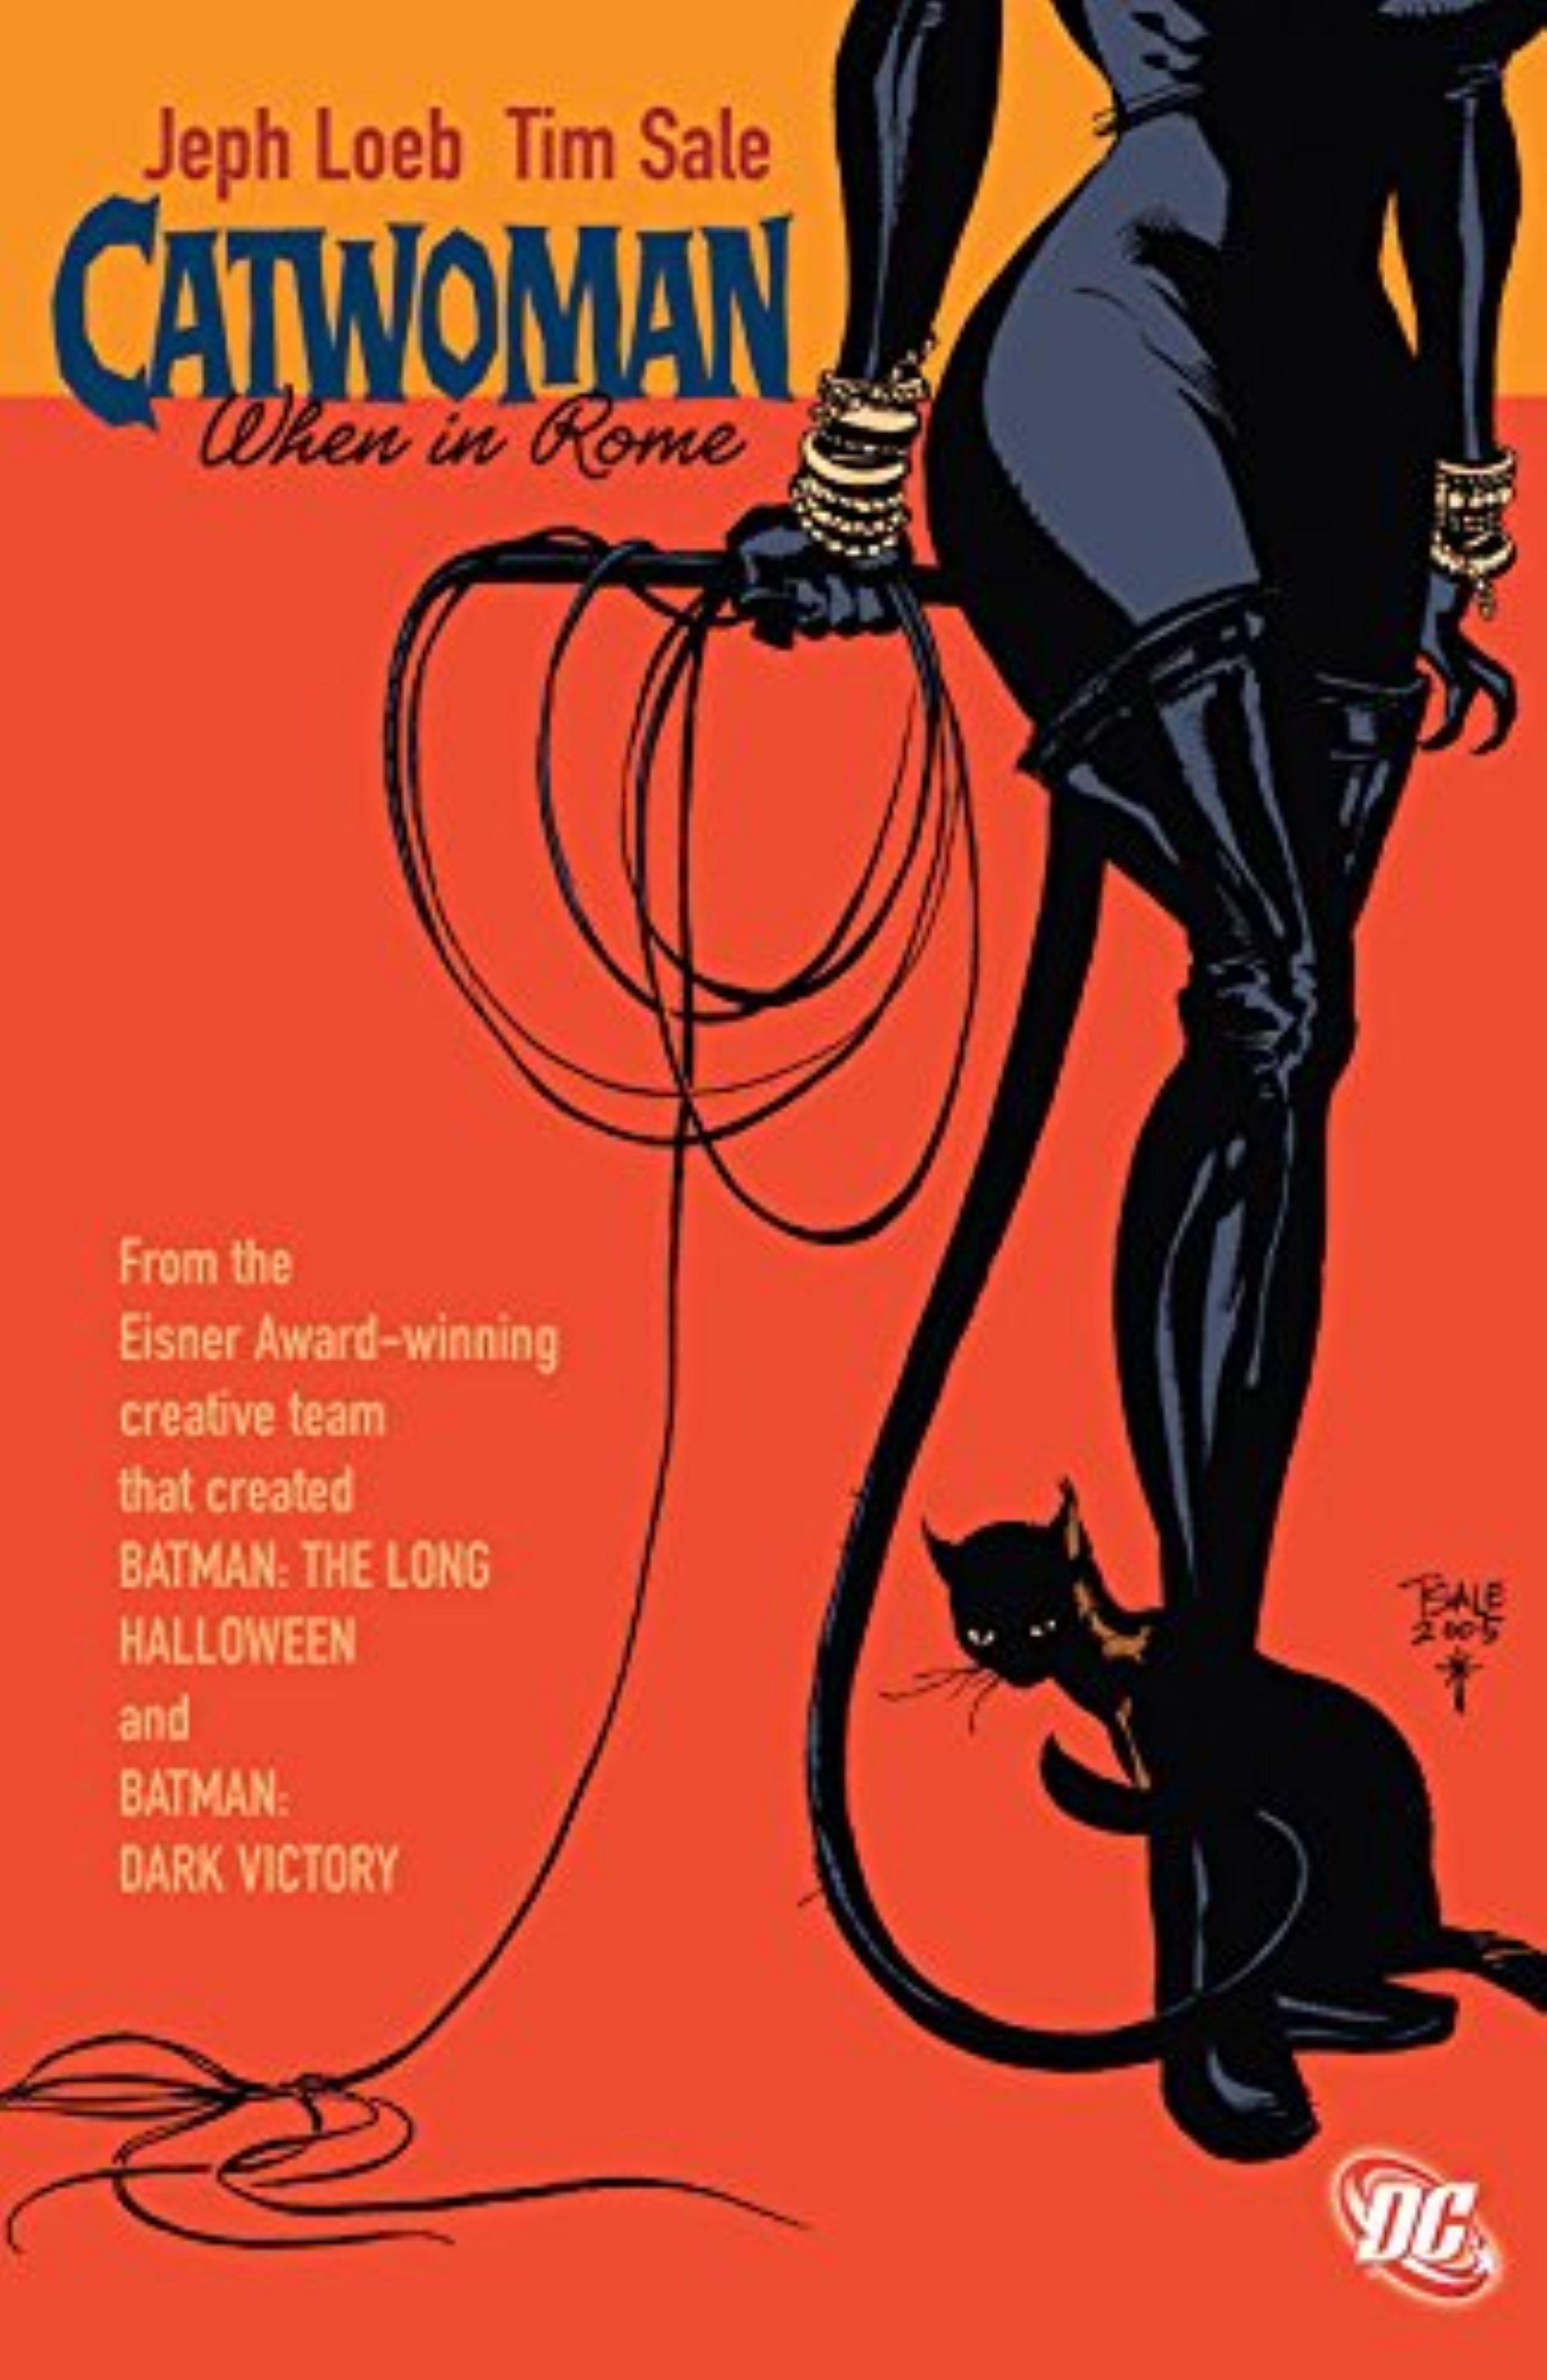 Catwoman: When In Rome (Image via DC)